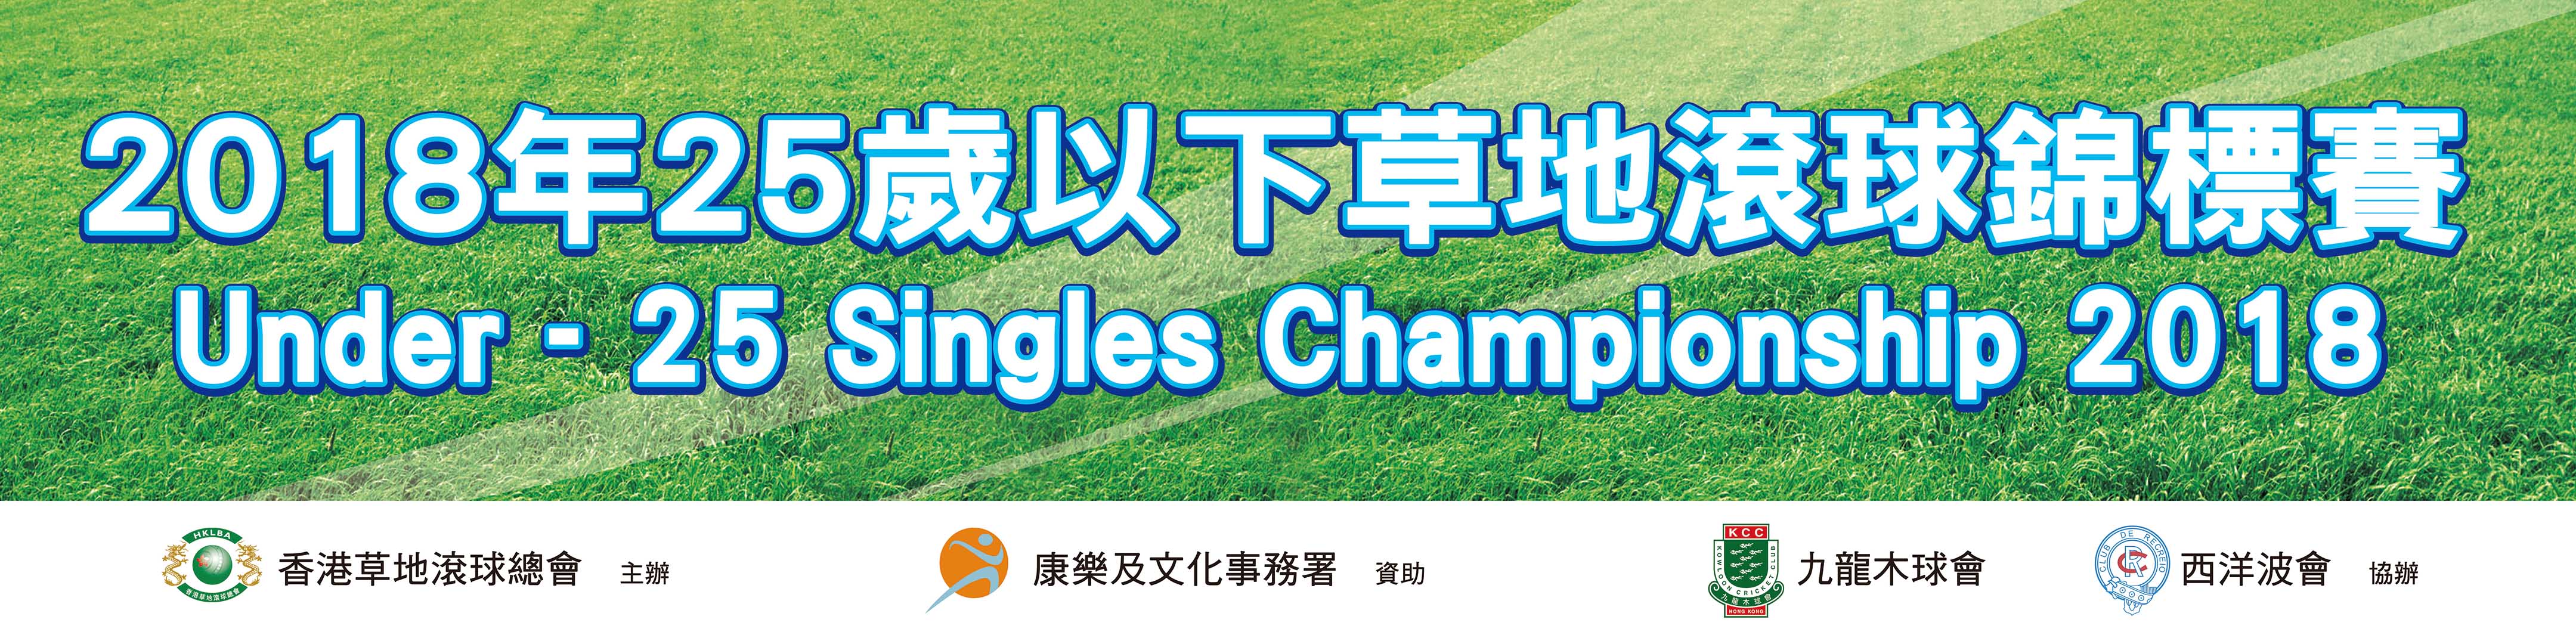 Under-25 Singles Championship 2018 (Updated on 3/1/19)